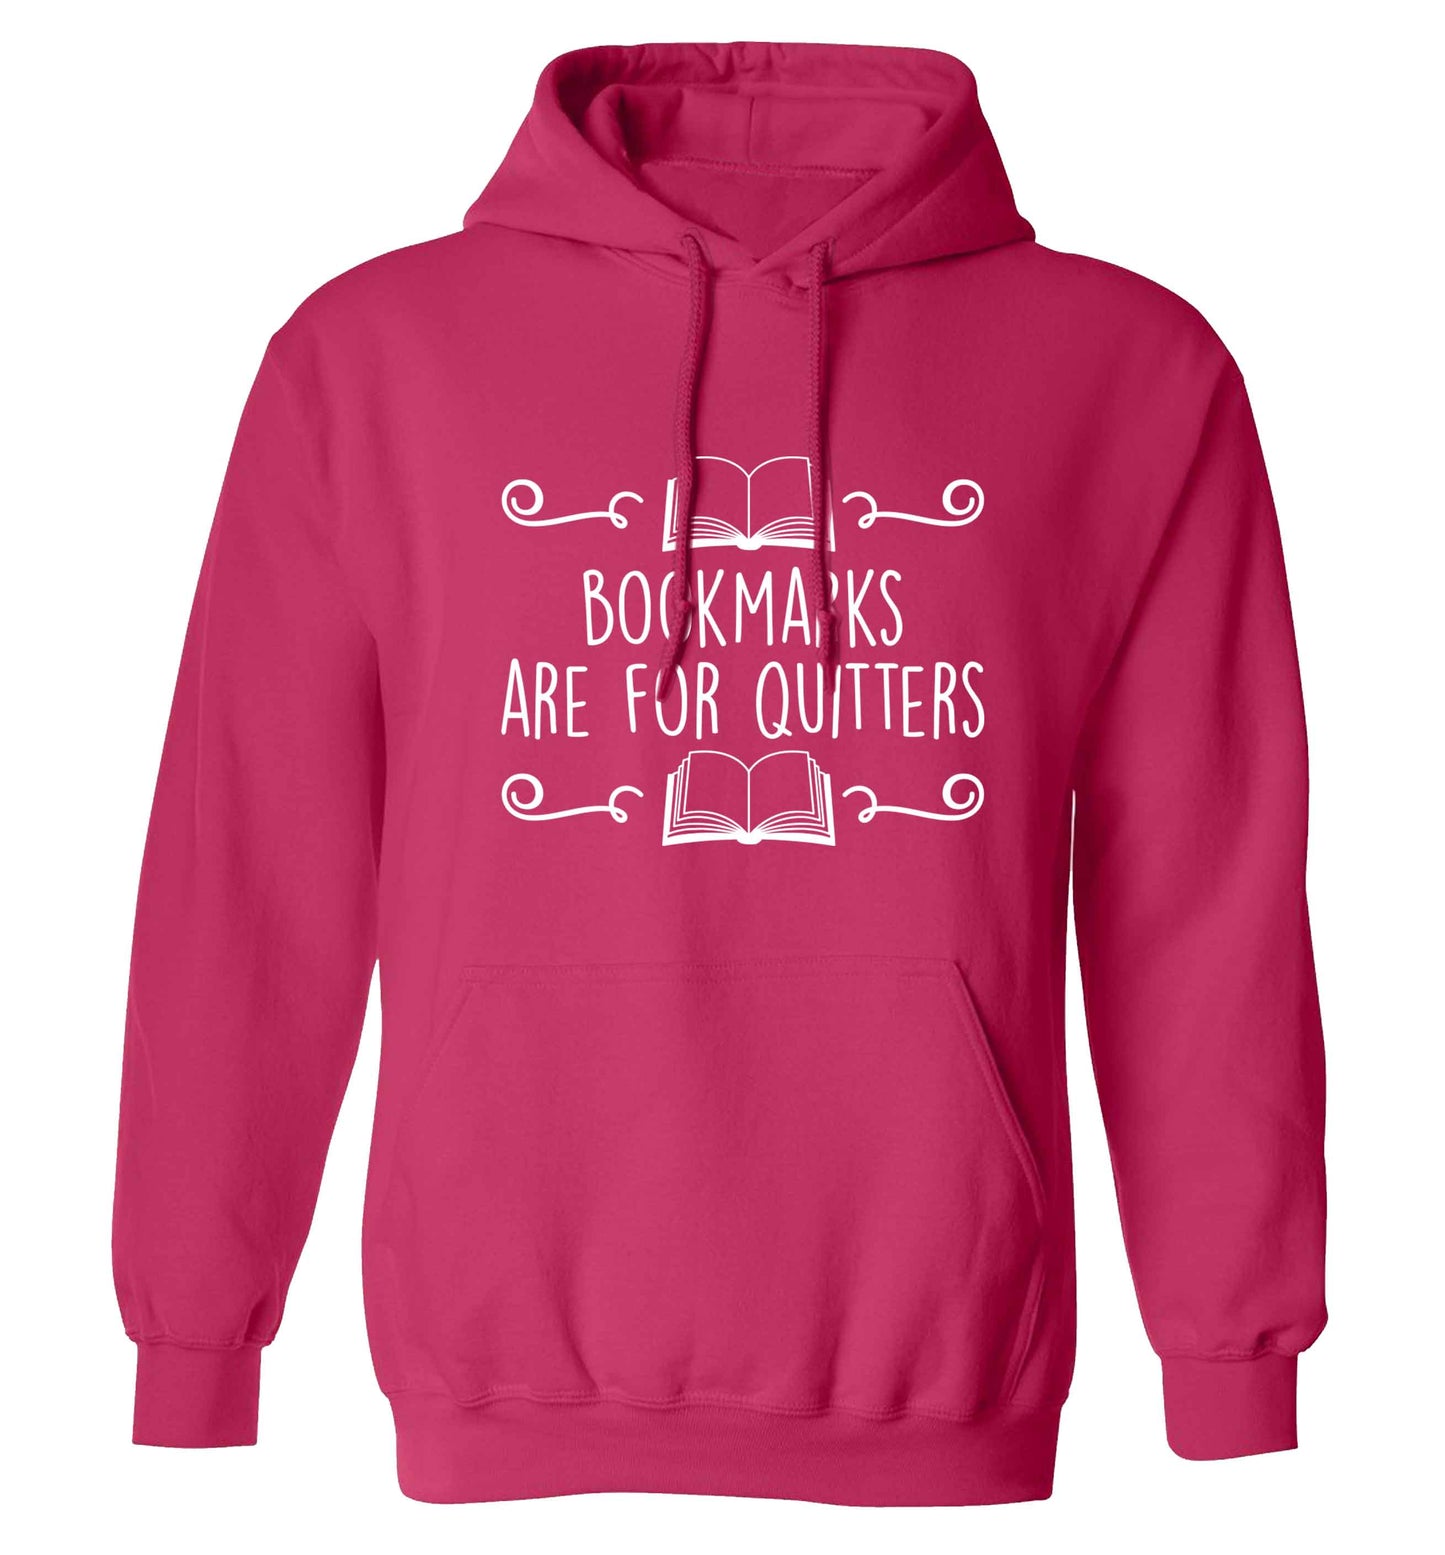 Bookmarks are for quitters adults unisex pink hoodie 2XL